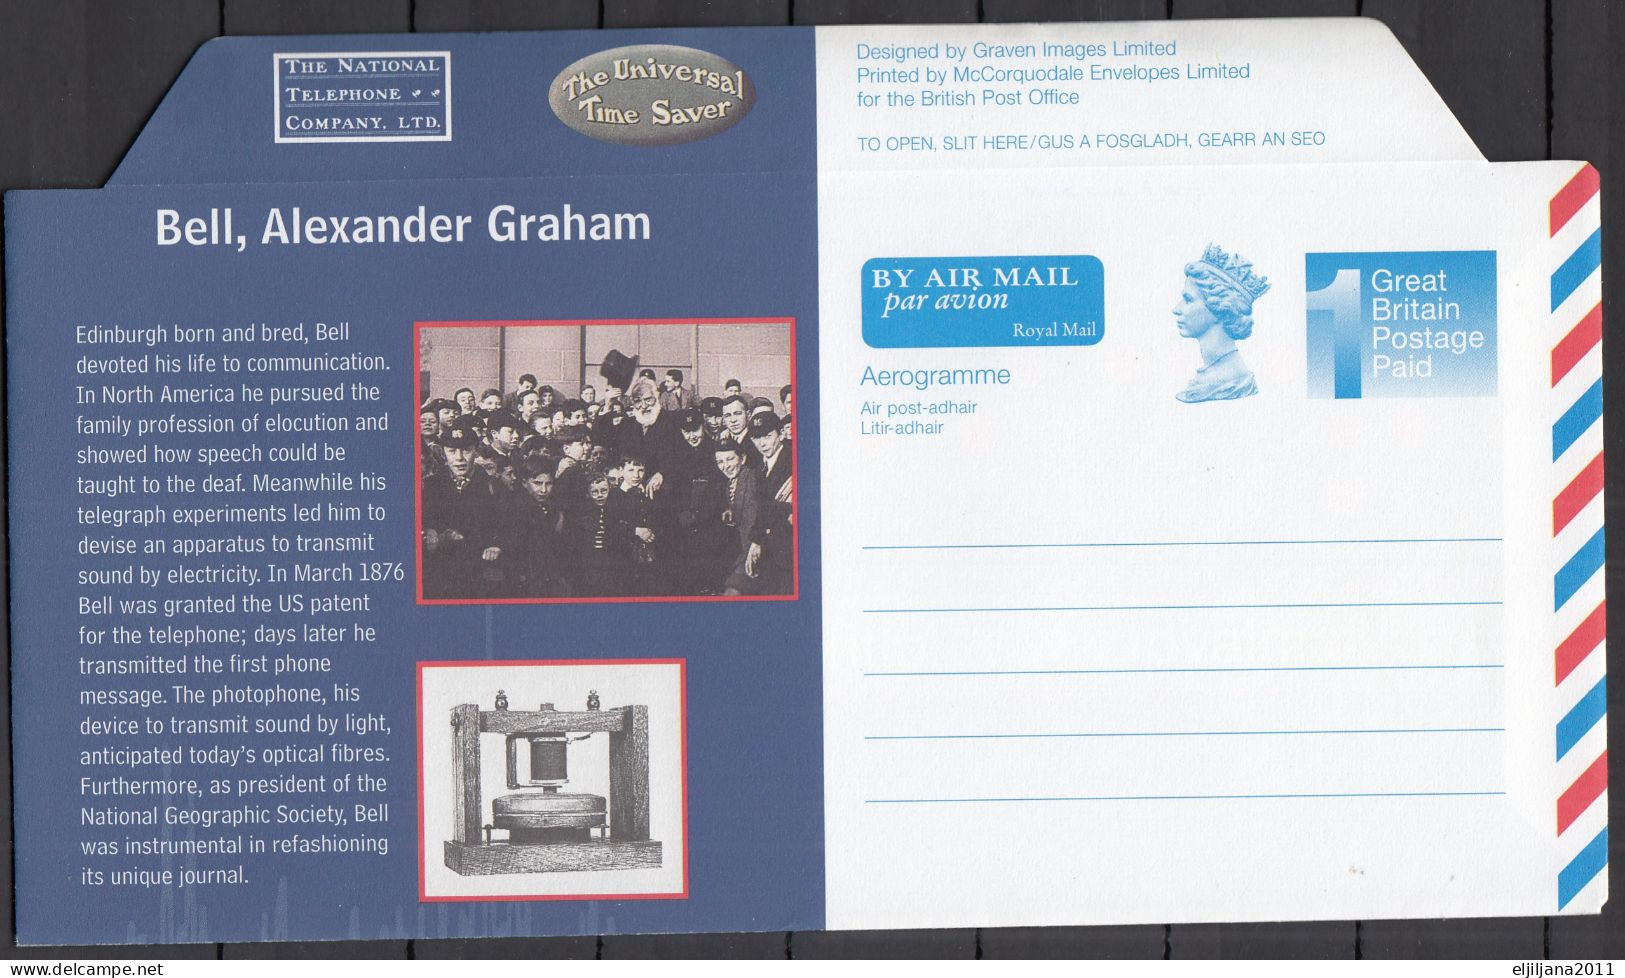 Great Britain - GB / UK, QEII 1997 ⁕ BY AIR MAIL Aerogramme, Royal Mail, Bell, Alexander Graham ⁕ Unused Cover - Entiers Postaux